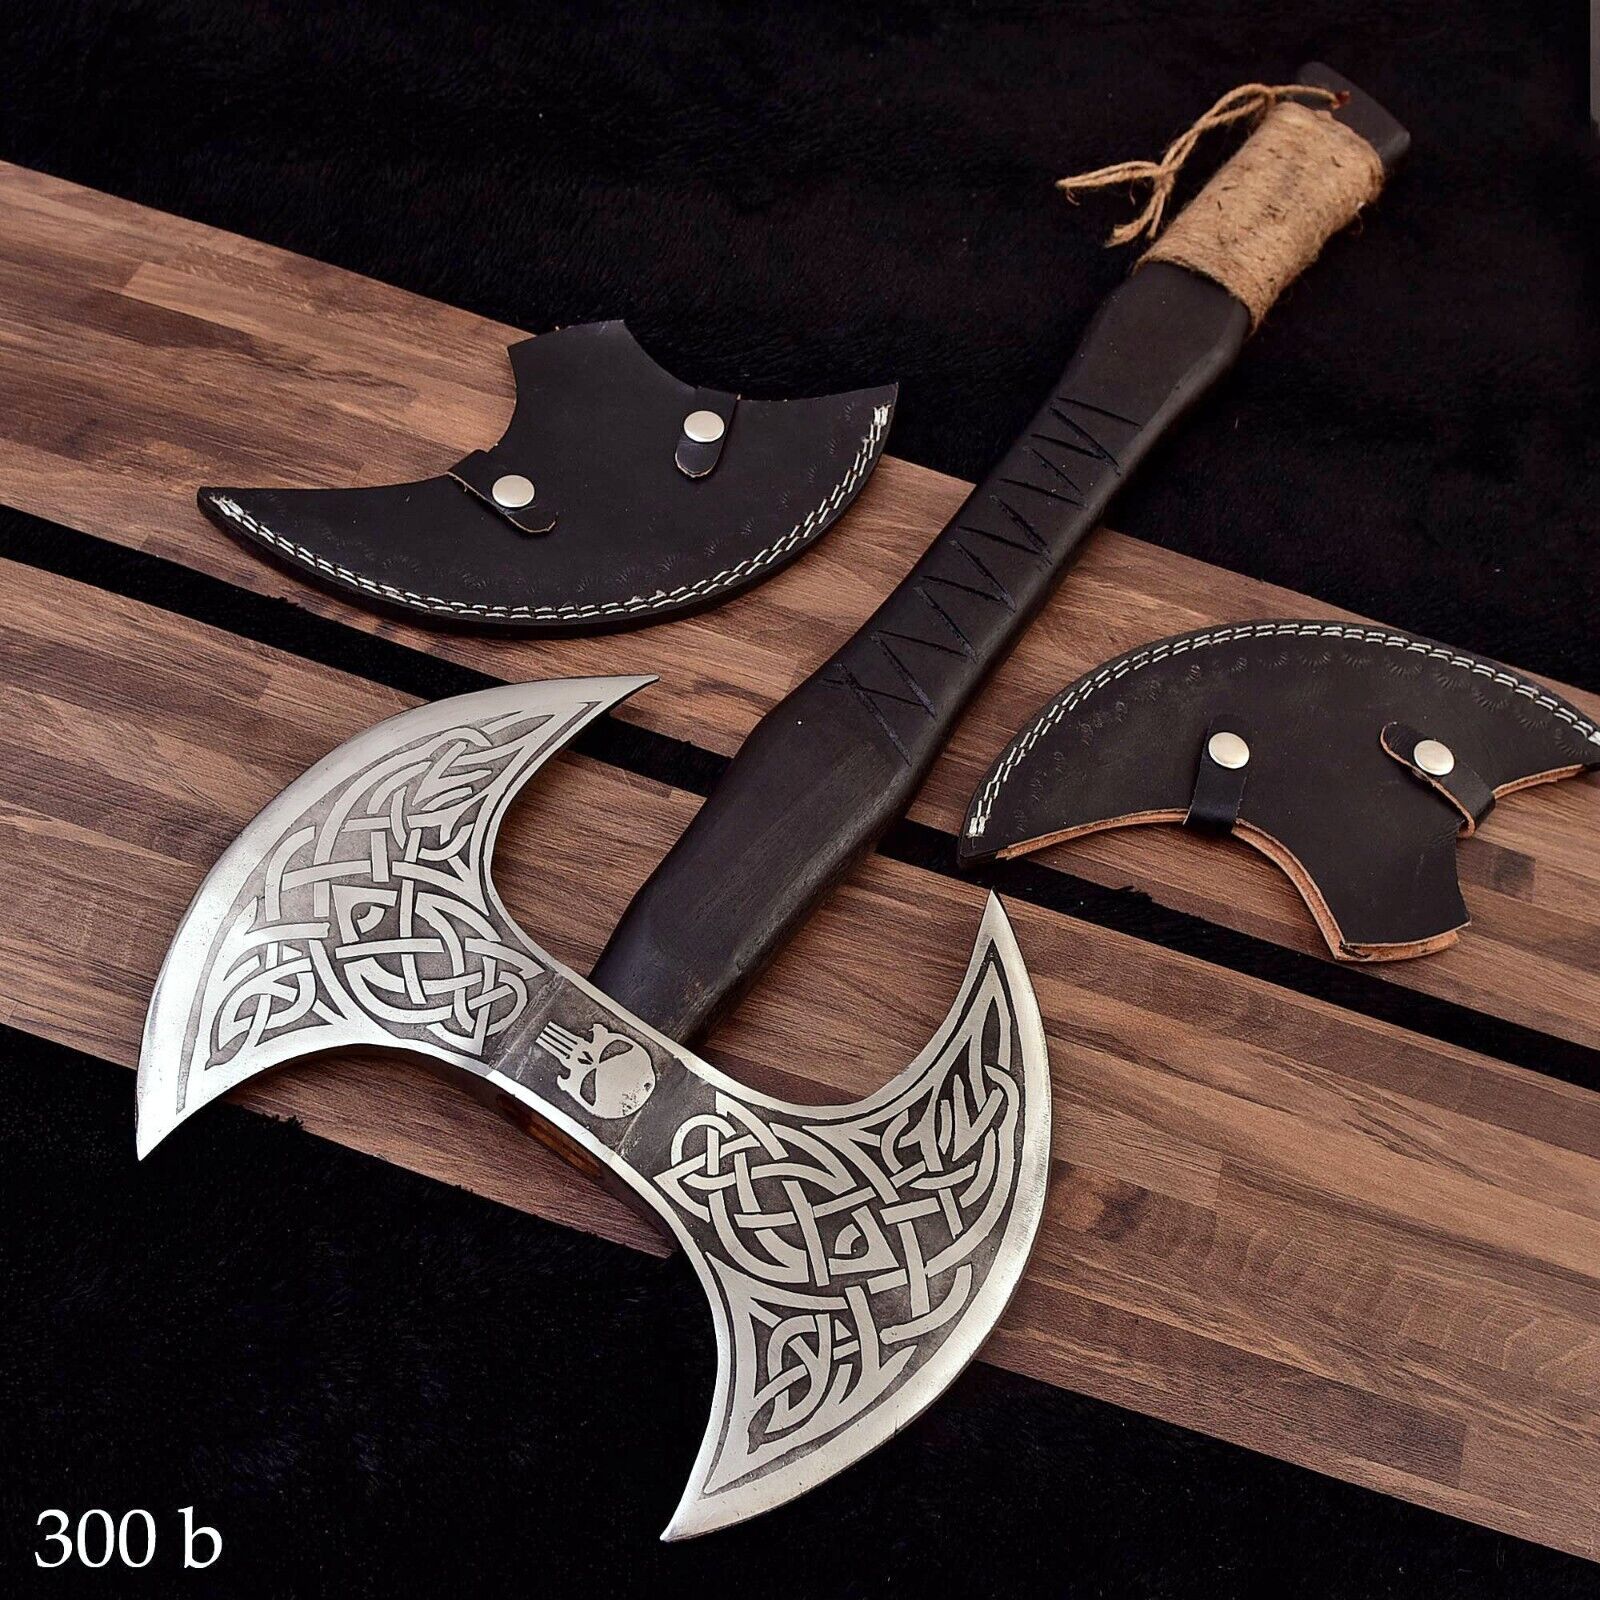 Double Headed Viking Axe, Hand Forged Steel Battle Axe, Double Blade Engraved Ax